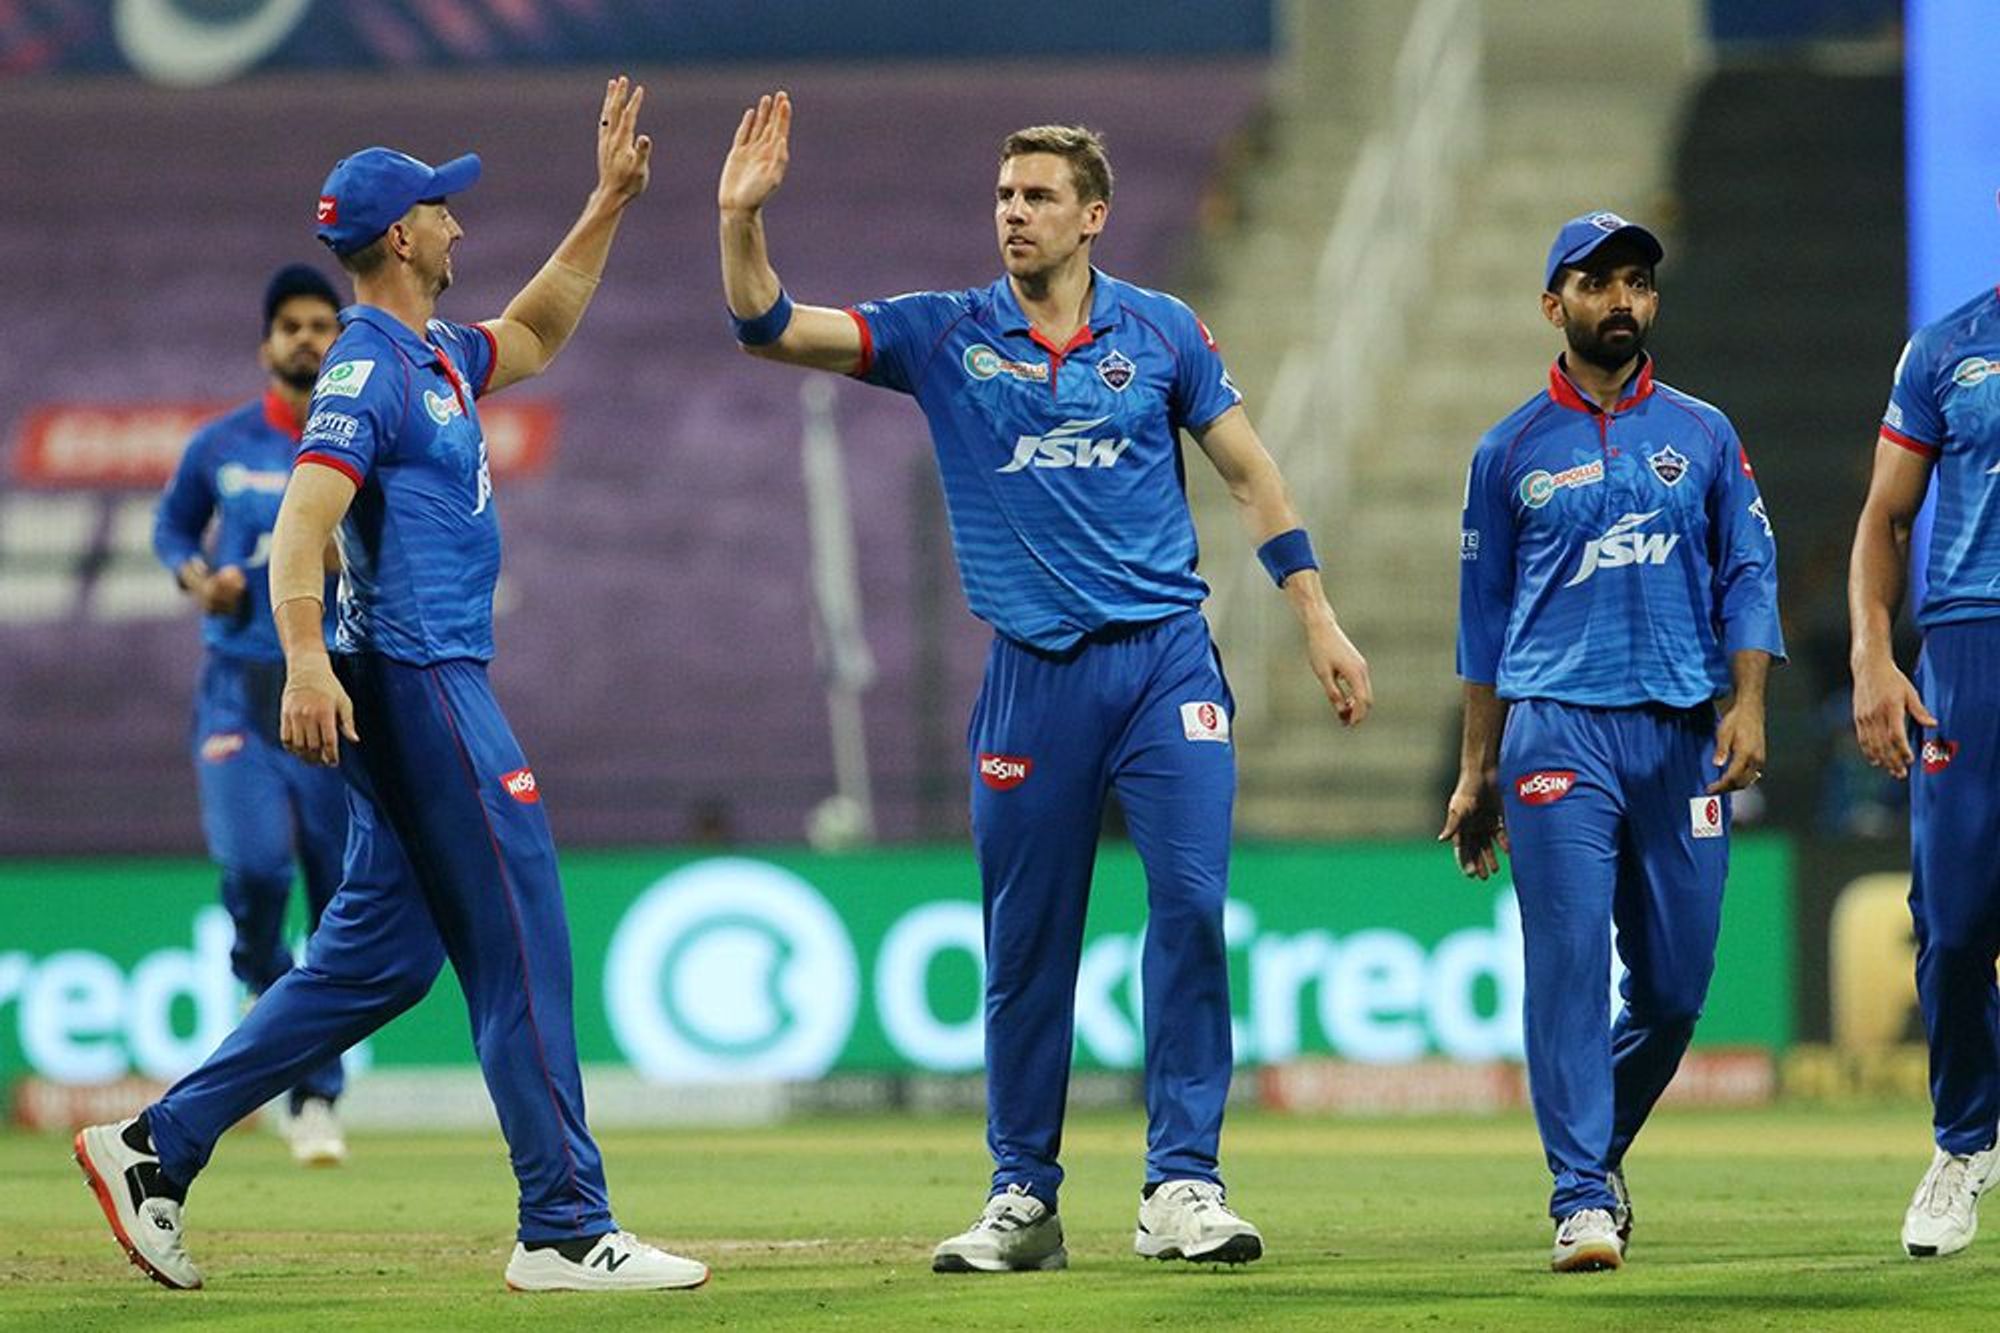 Man of the Match Anrich Nortje took 3 wickets against RCB in Abu Dhabi. (Photo - BCCI / IPL) 